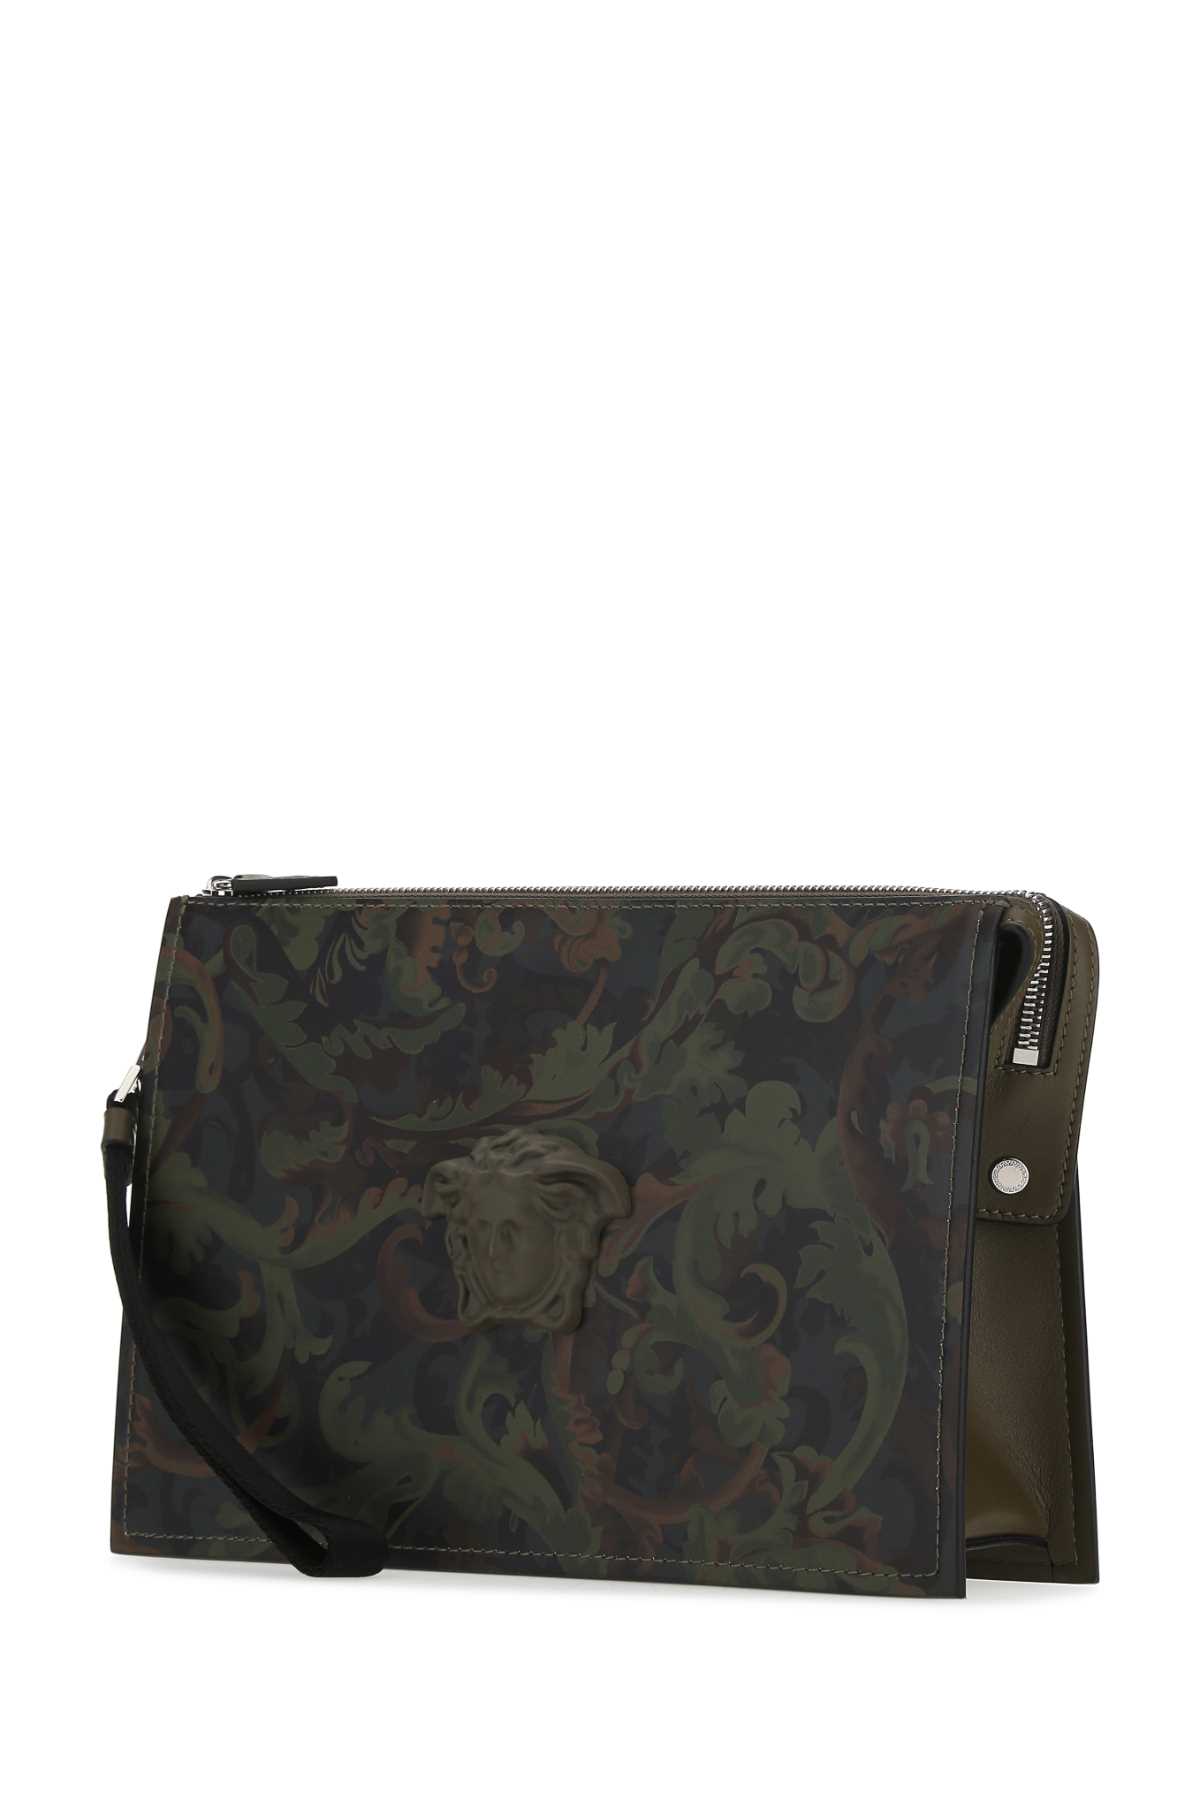 Versace Printed Leather Clutch In 5k00p